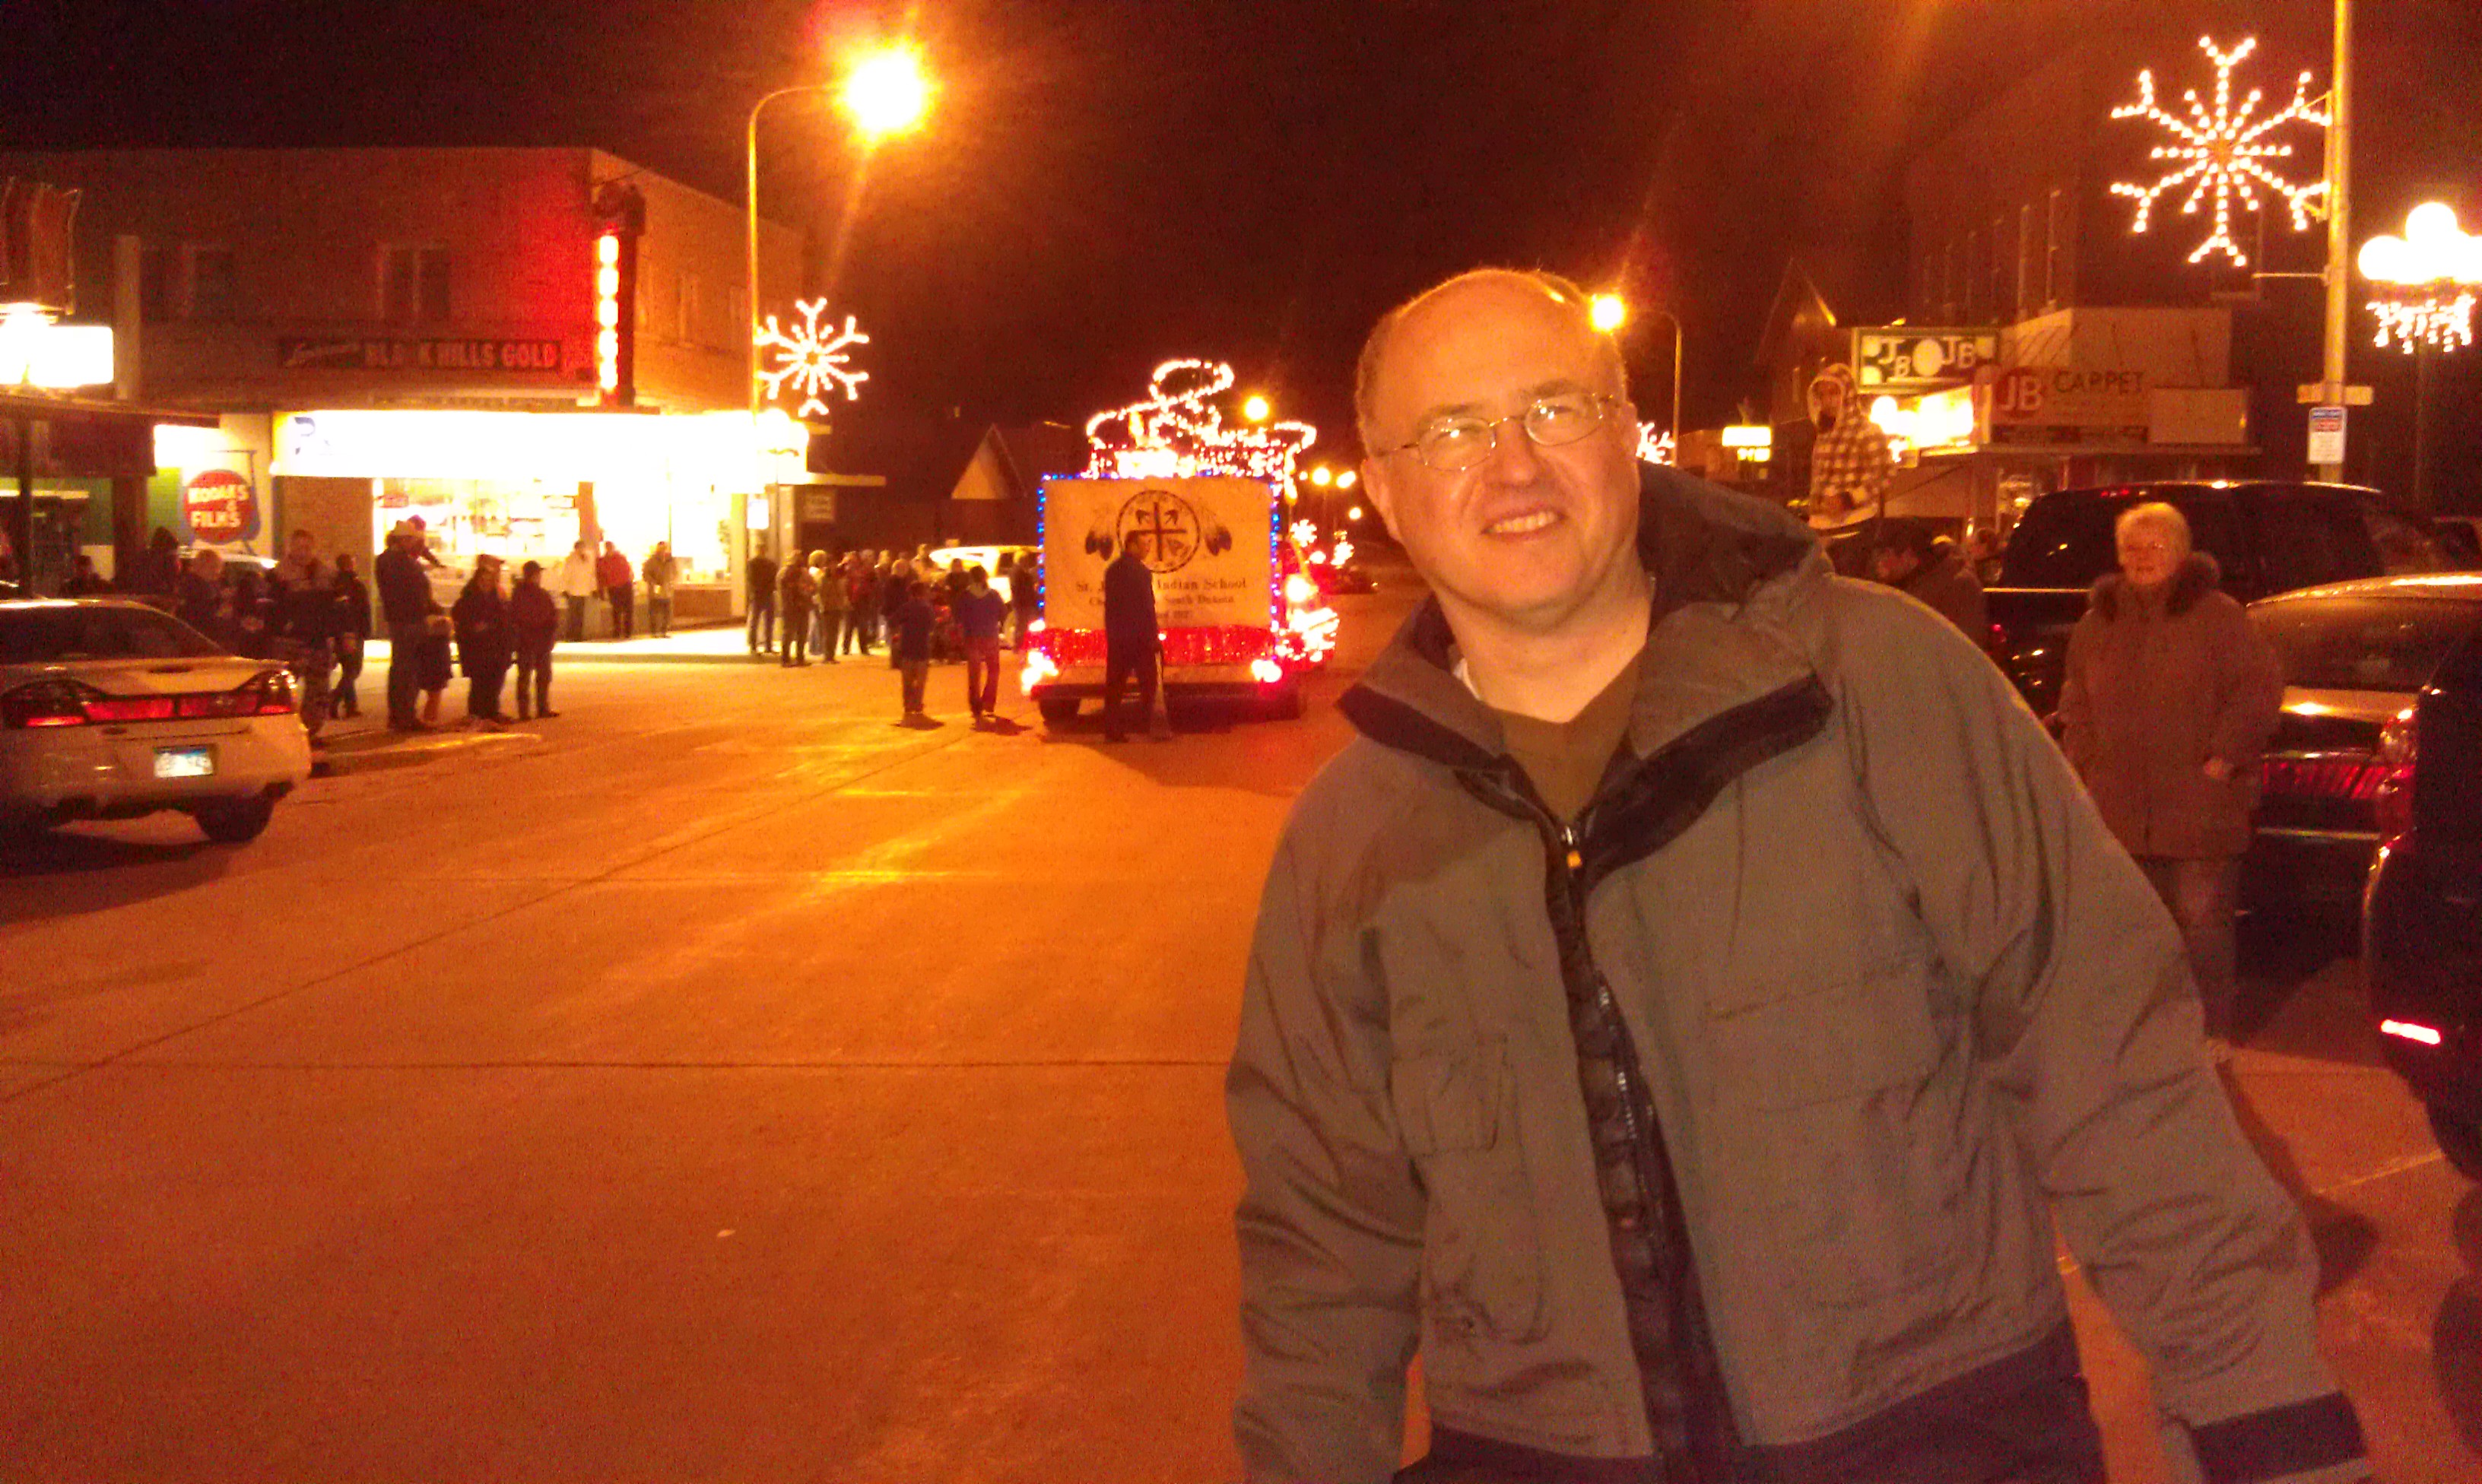 Here I am with the St. Joseph's Indian School float in the background. 